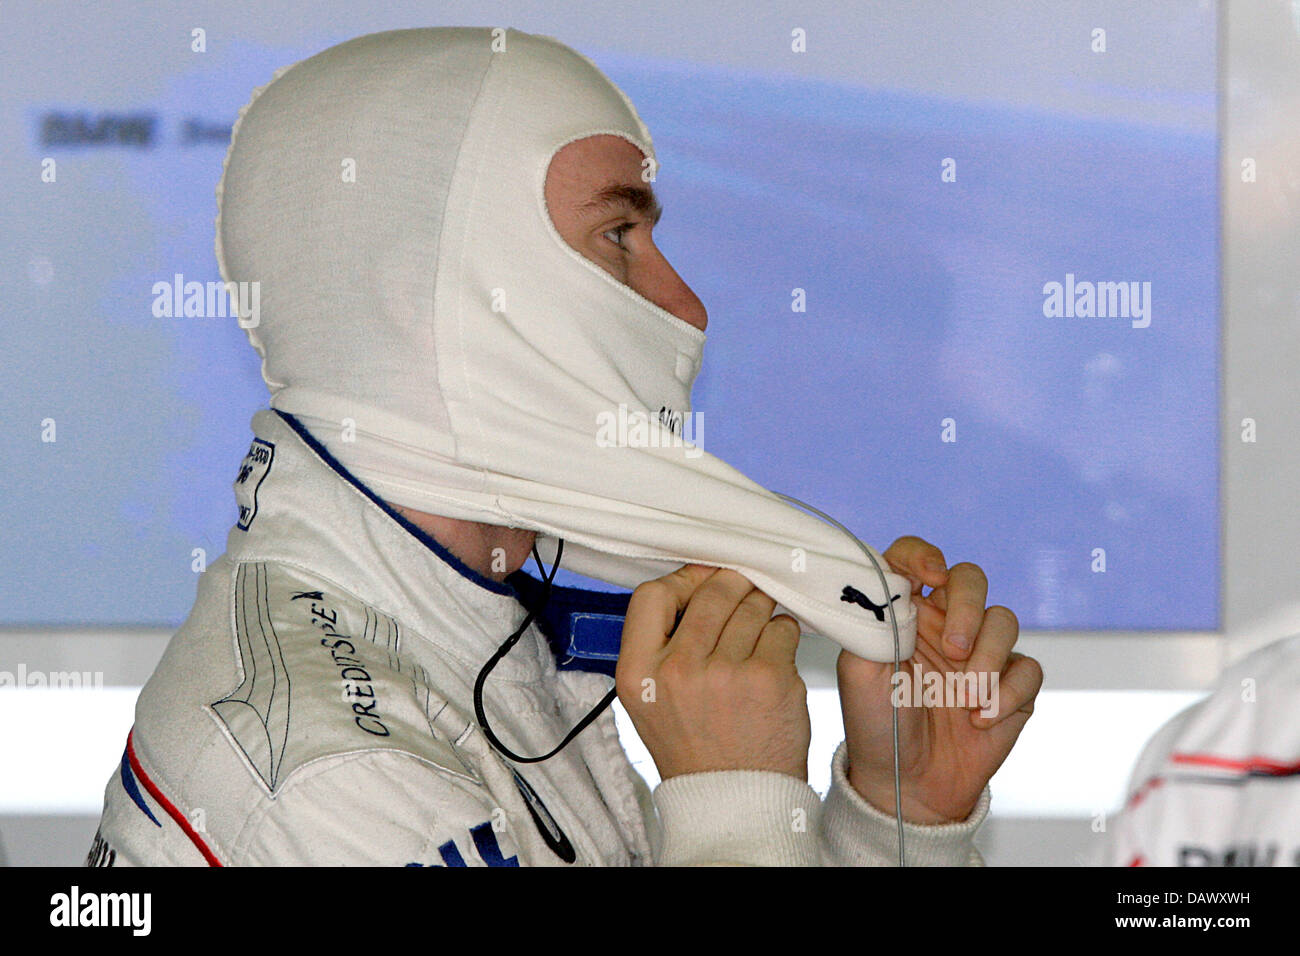 German Formula One pilot Nick Heidfeld of BMW Sauber takes off his fireproof clothes after the third practice session at the Circuit de Catalunya race track near Barcelona, Spain, 12 May 2007. The 2007 Formula 1 Grand Prix of Spain takes place on 13 May. Photo: Jens Buettner Stock Photo